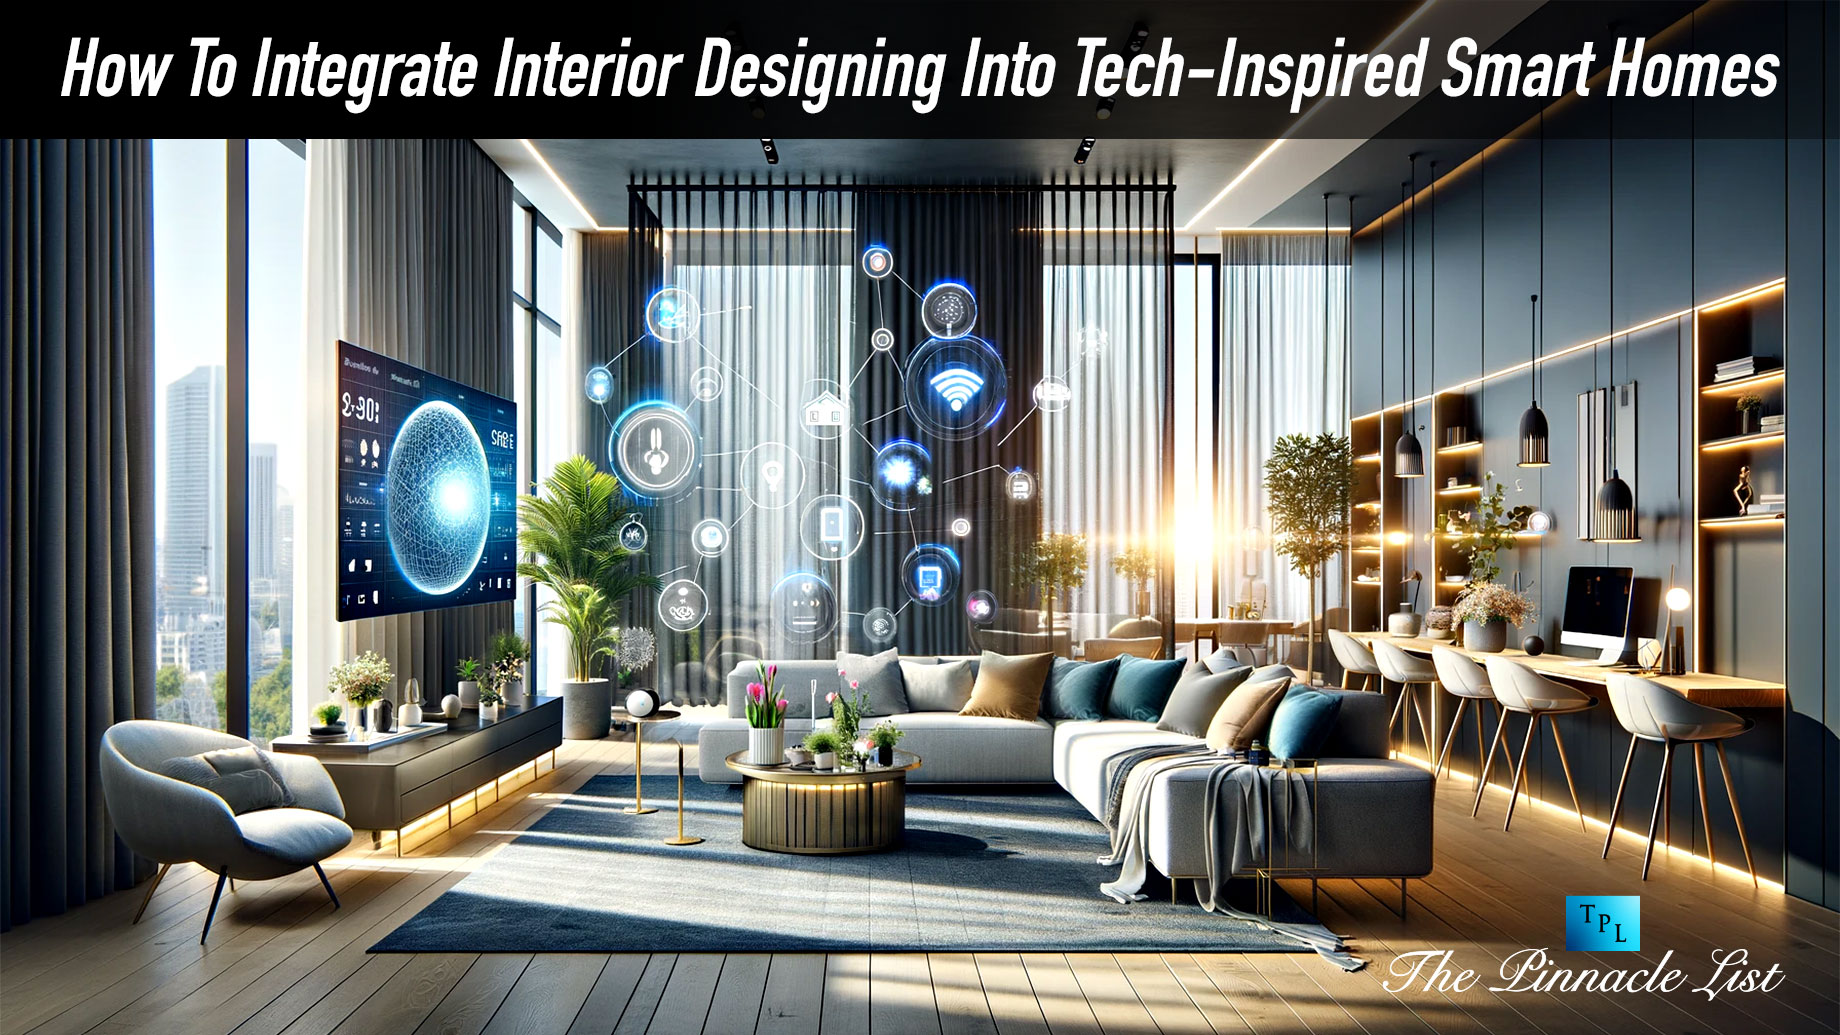 How To Integrate Interior Designing Into Tech-Inspired Smart Homes